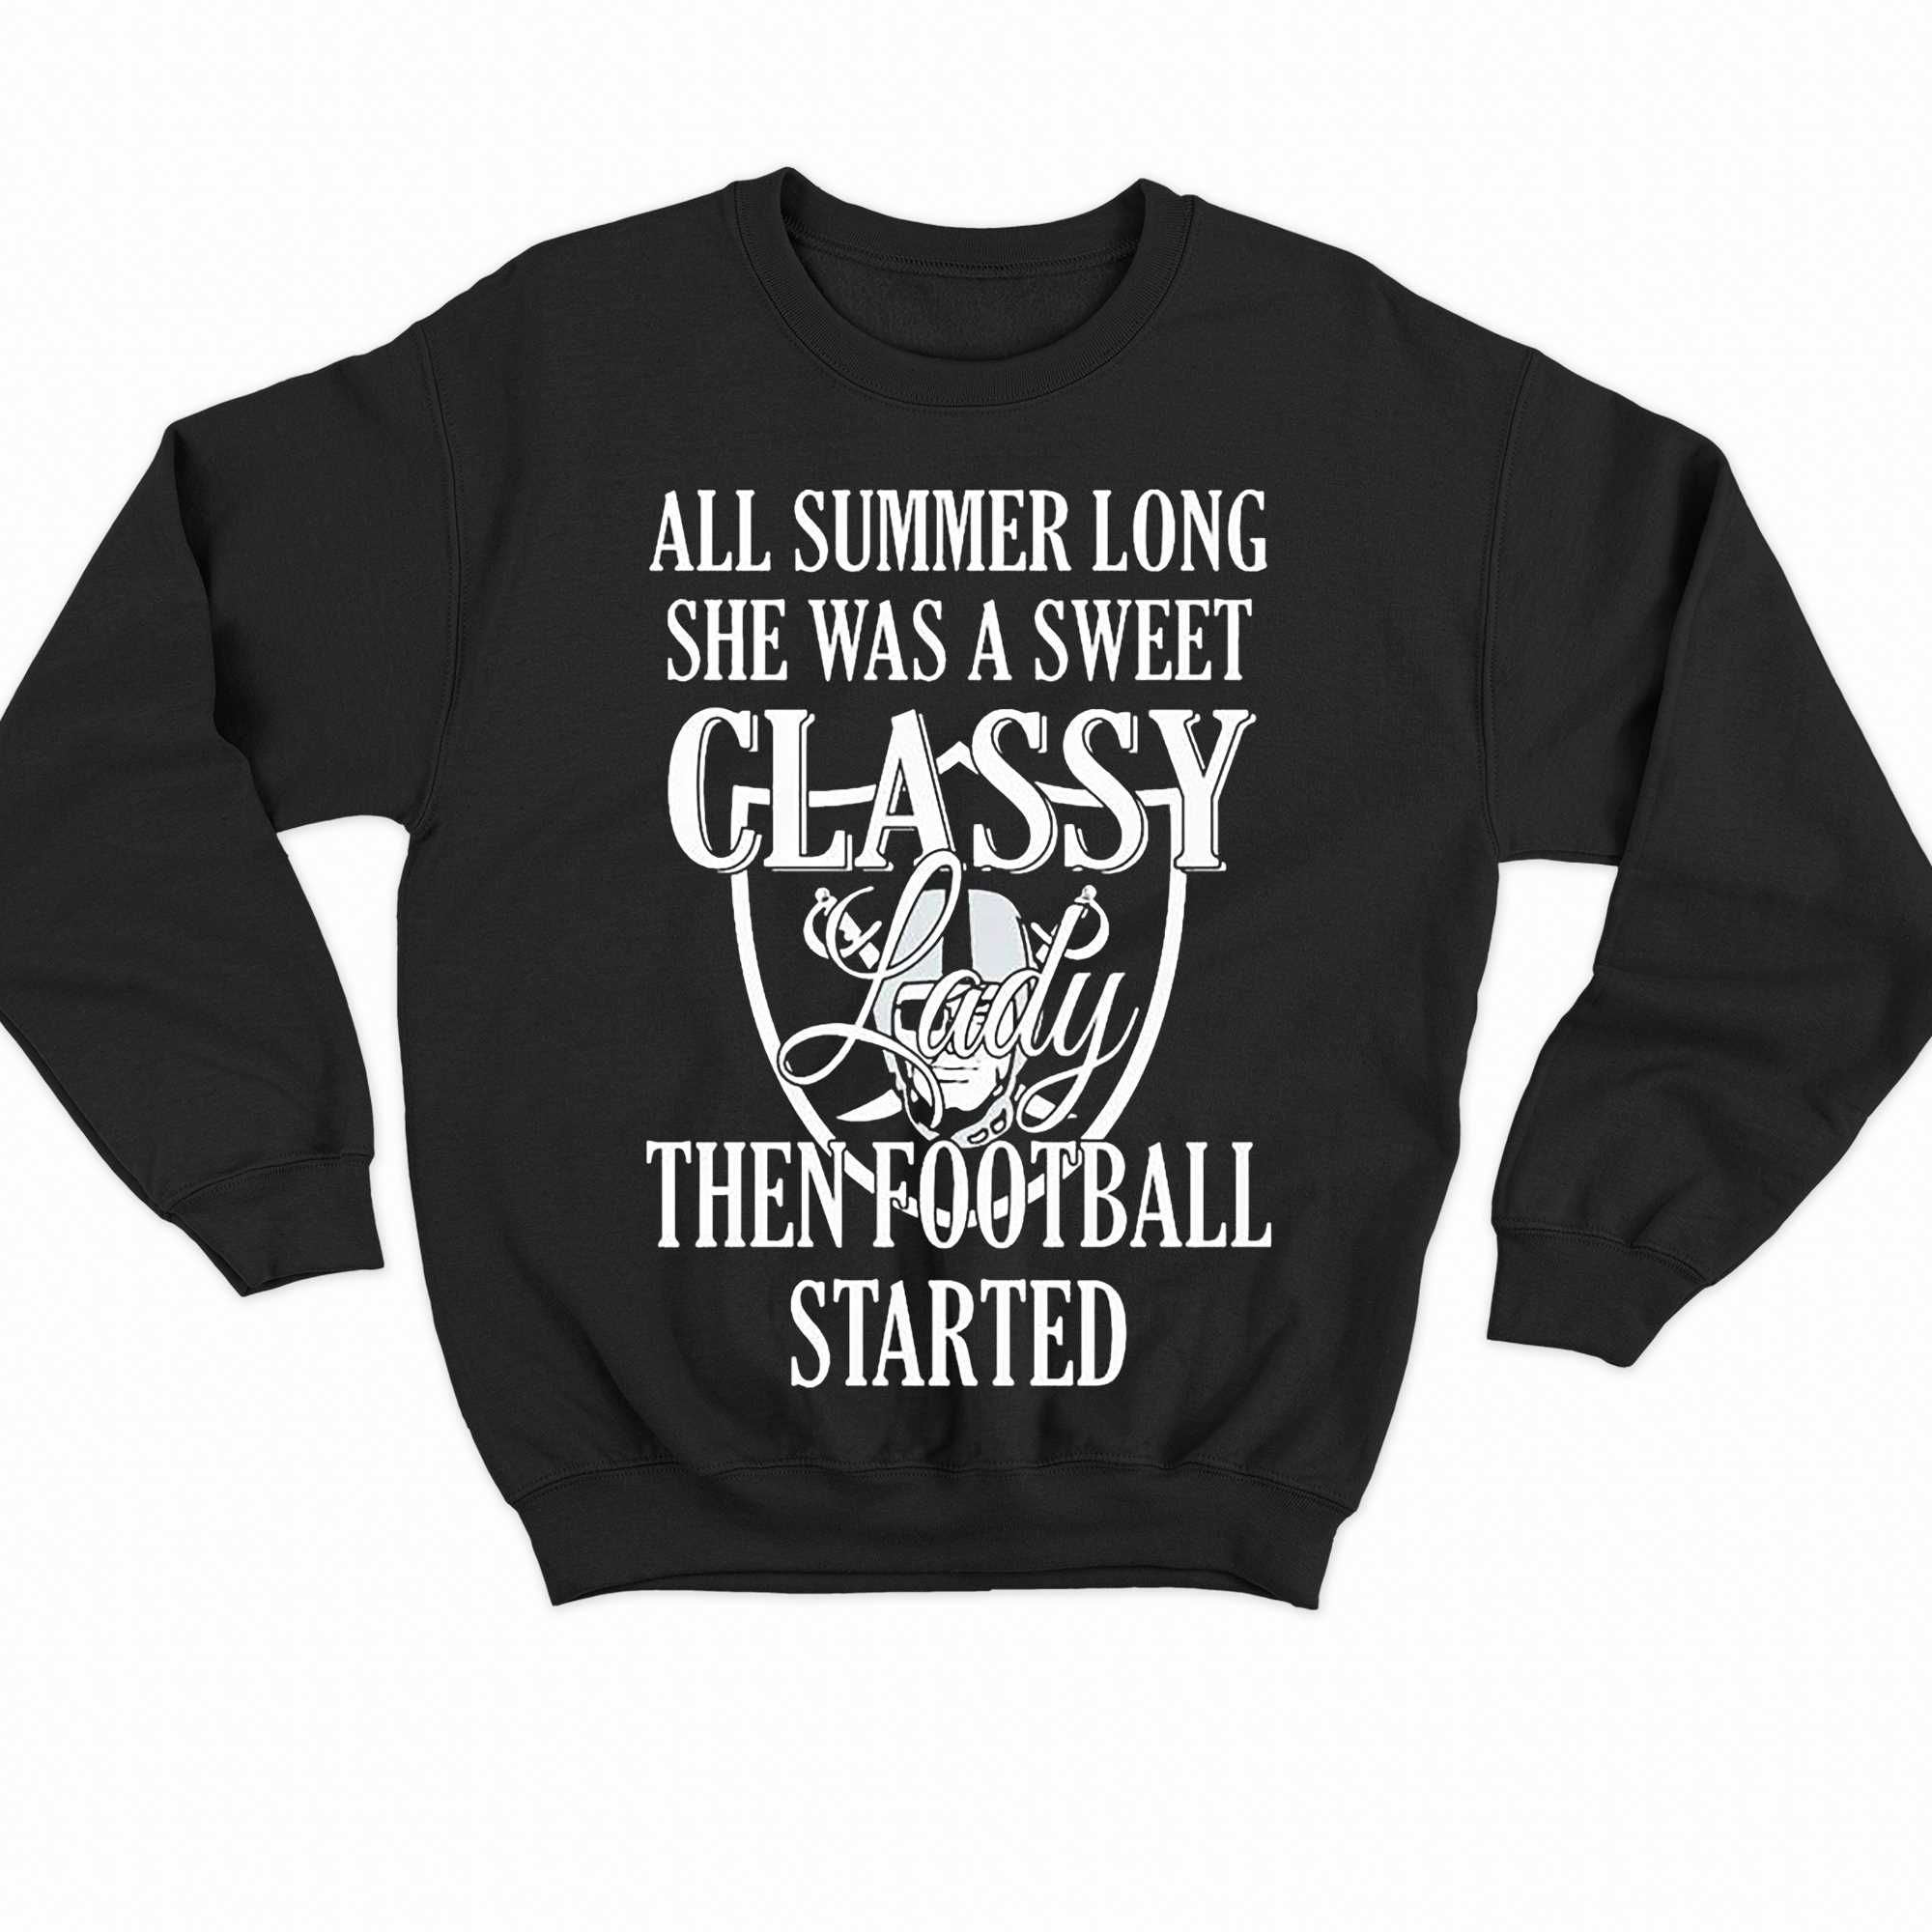 Las Vegas Raiders All Summer Long She A Sweet Classy Lady The Football Started Shirt 